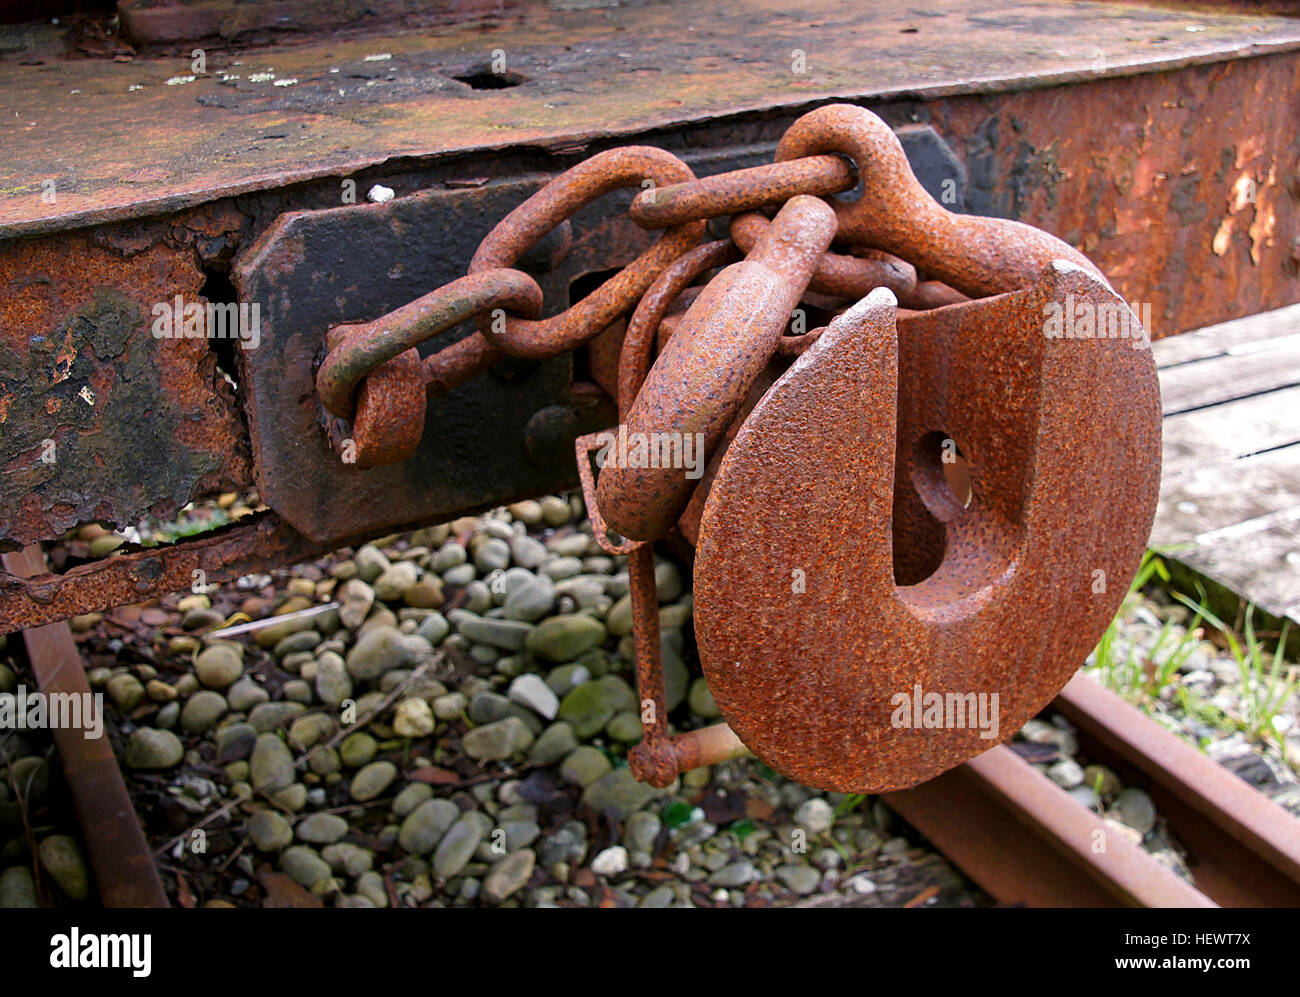 A coupling (or a coupler) is a mechanism for connecting rolling stock in a train. The design of the coupler is standard, and is almost as important as the track gauge, since flexibility and convenience are maximized if all rolling stock can be coupled together. Stock Photo